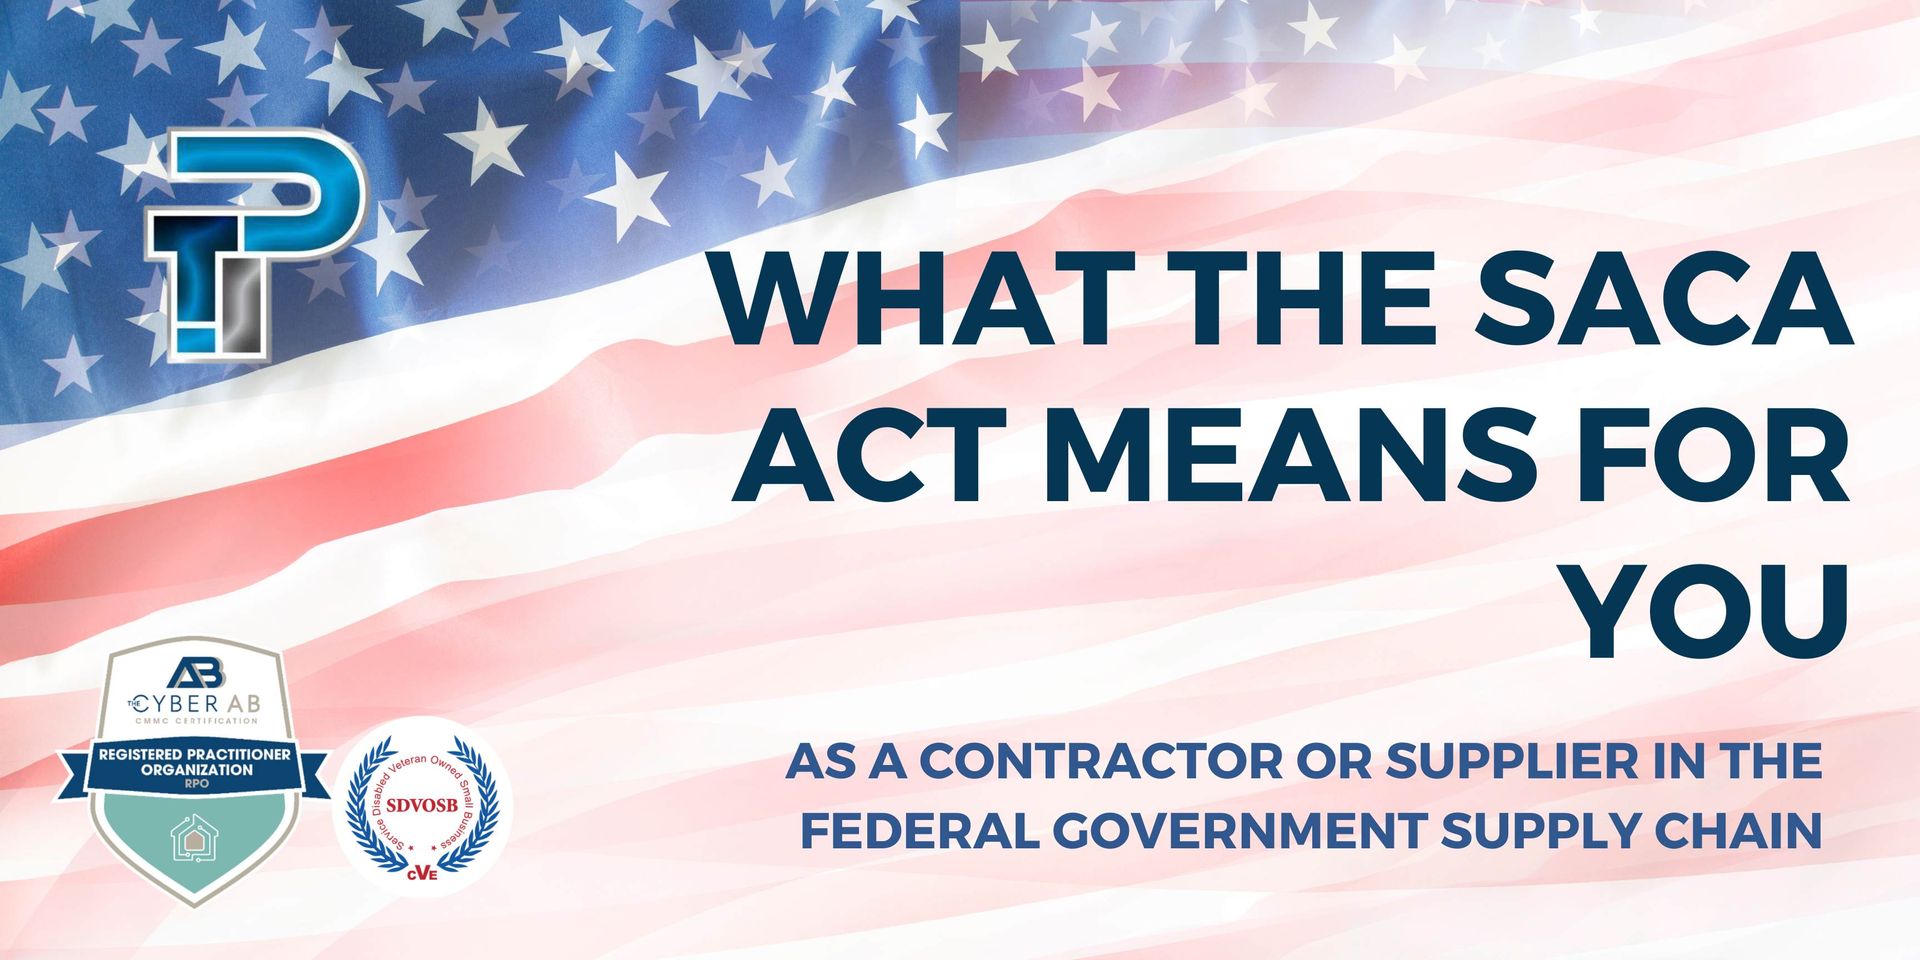 What the SACA Act means for you as a contractor or supplier in the Federal Government supply chain